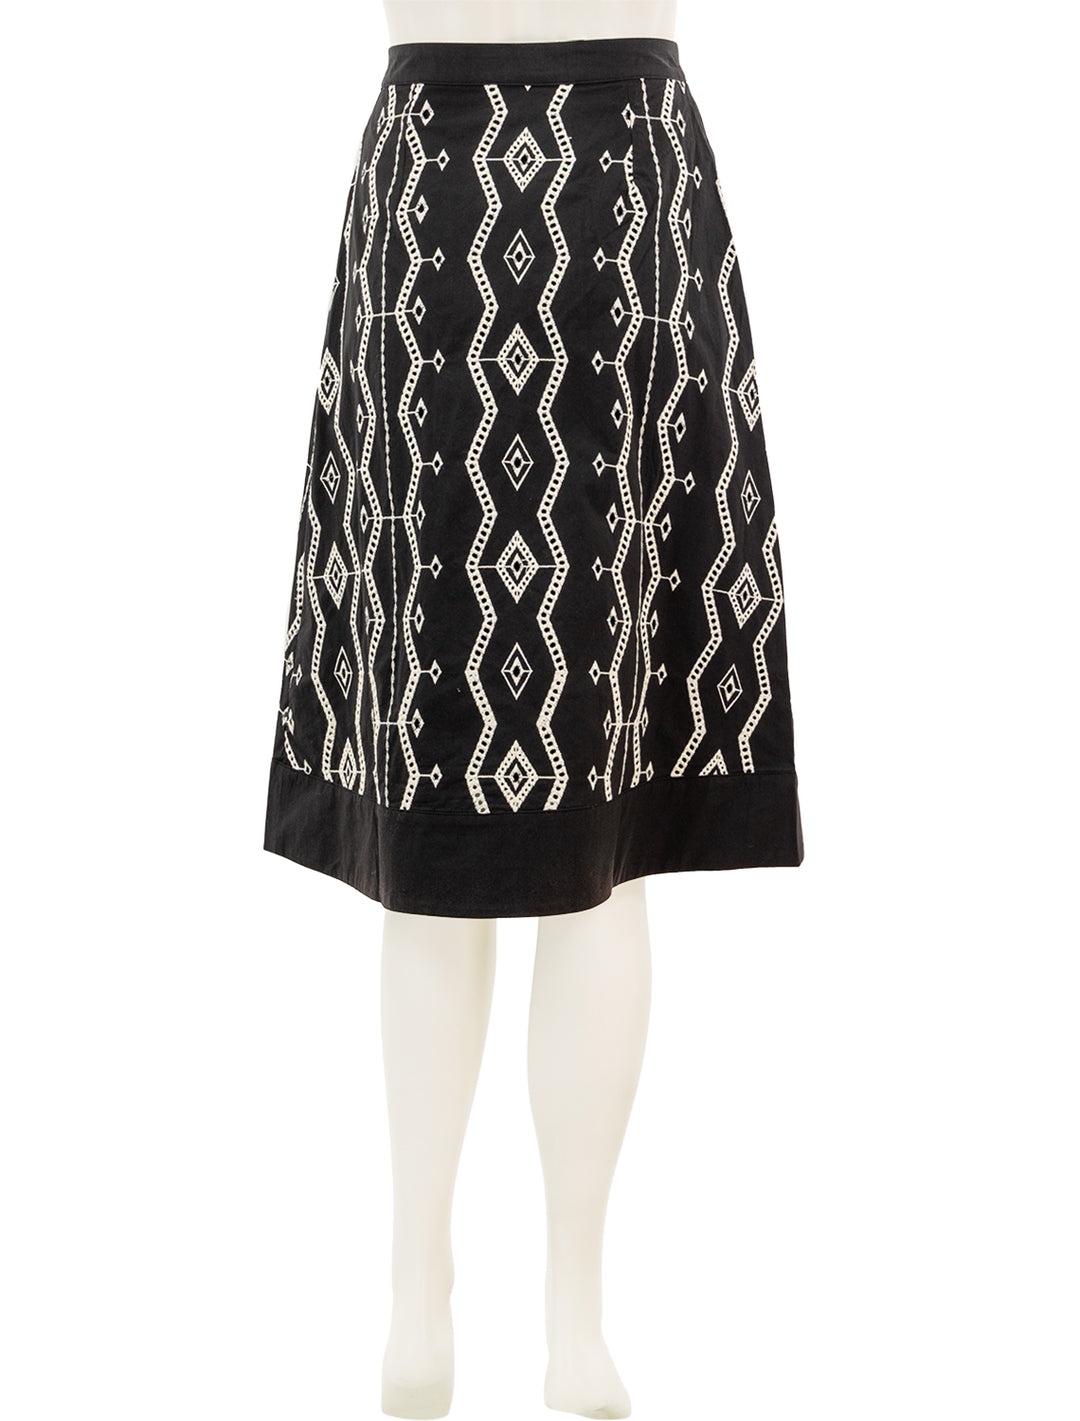 Back view of Suncoo Paris' first eyelet skirt in noir.